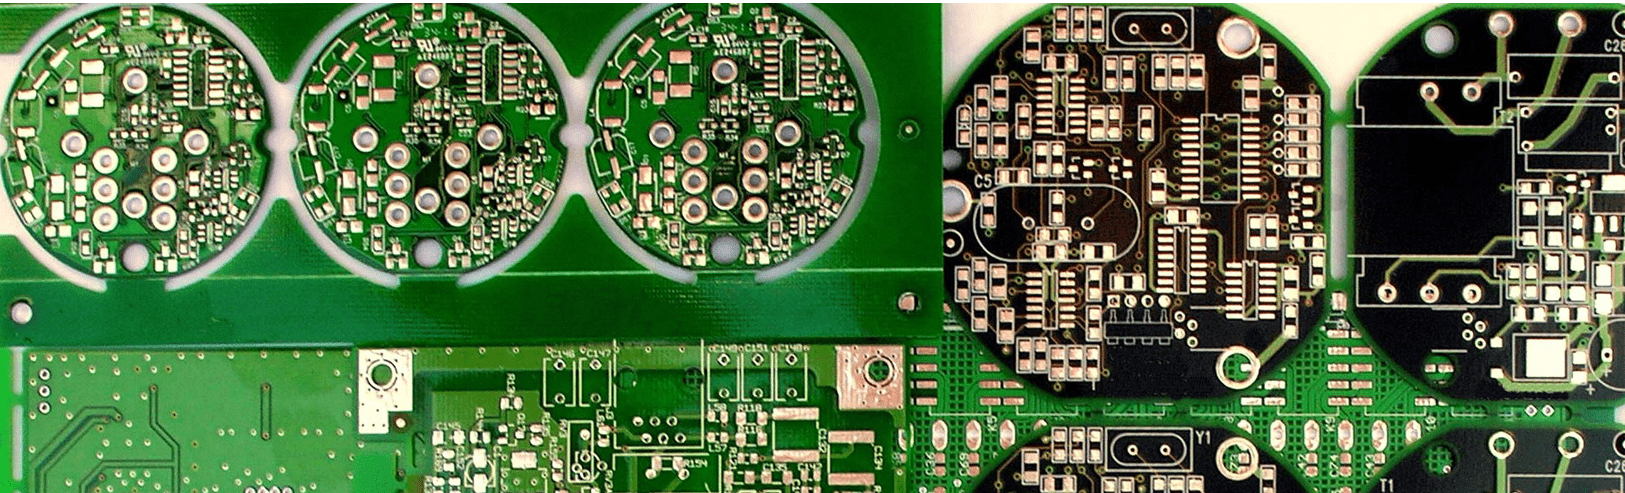 A close up image of a printed circuit board